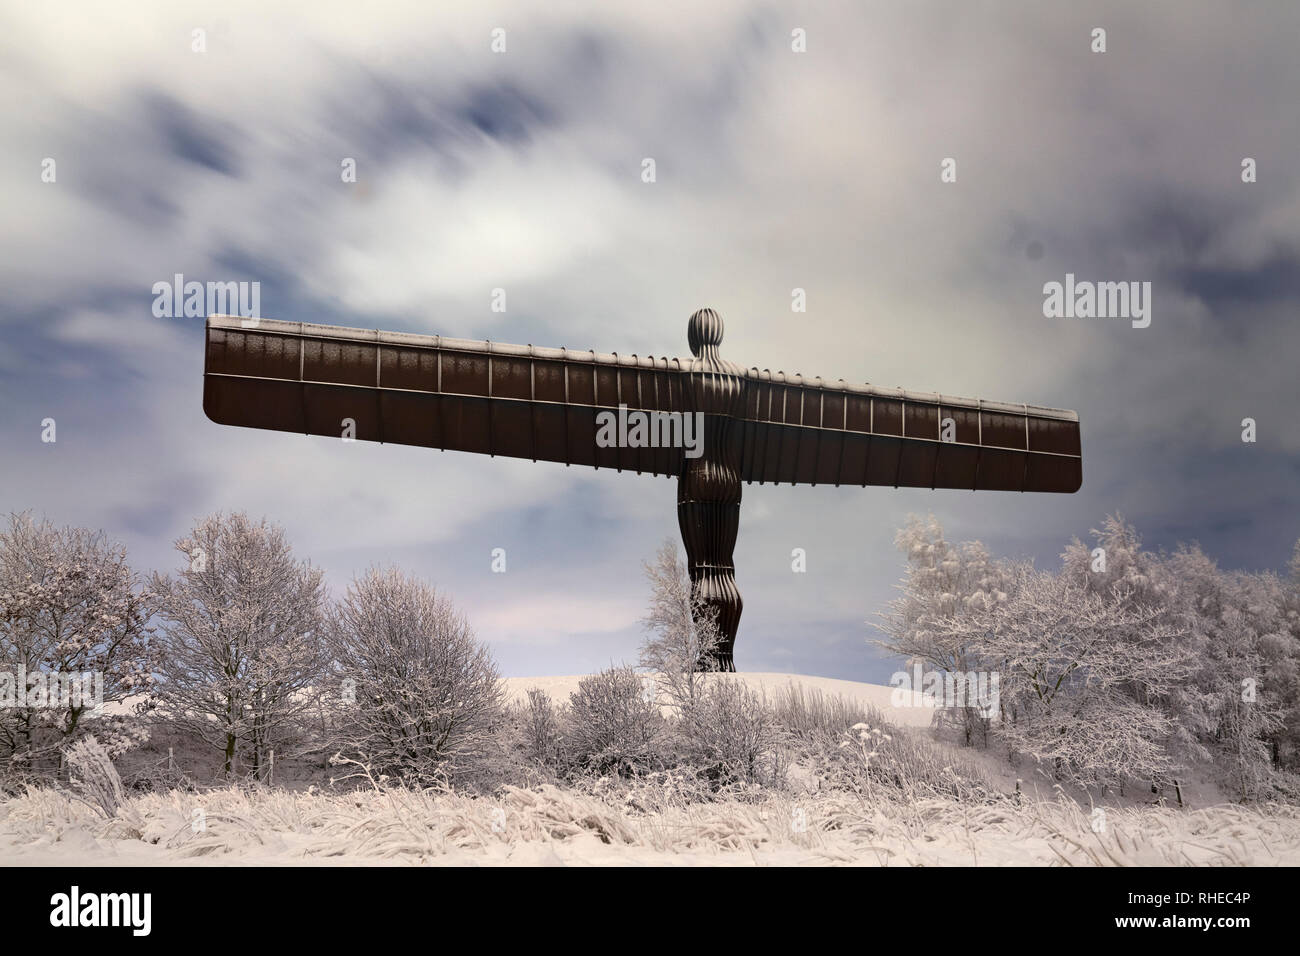 A time exposure of the Angel of the North in Gateshead, taken at 02:43hrs Saturday, after snowfalls yesterday and overnight are expected to bring widespread disruption. Stock Photo